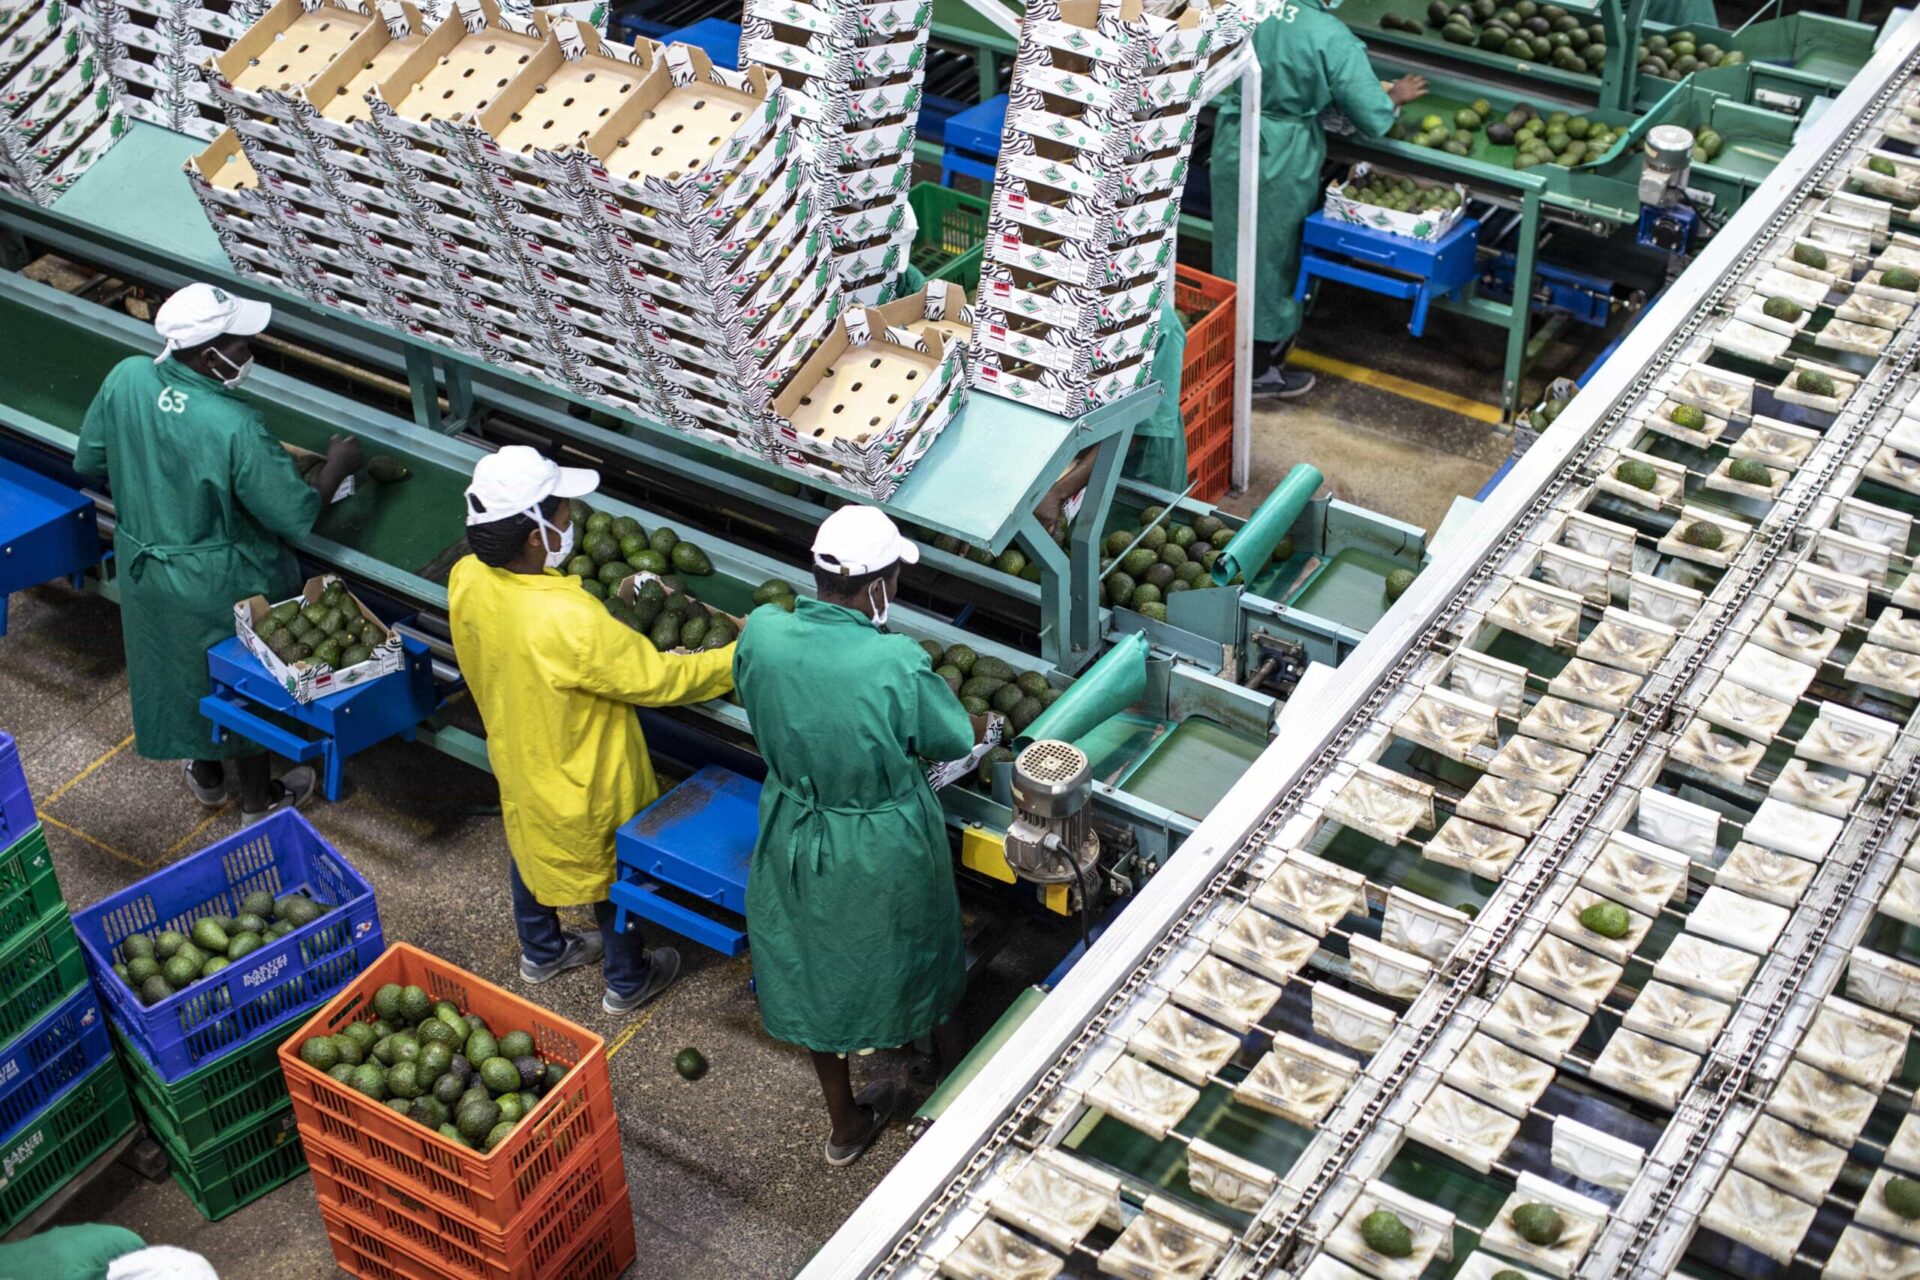 Processing line for Avocados in a cold room in Kenya